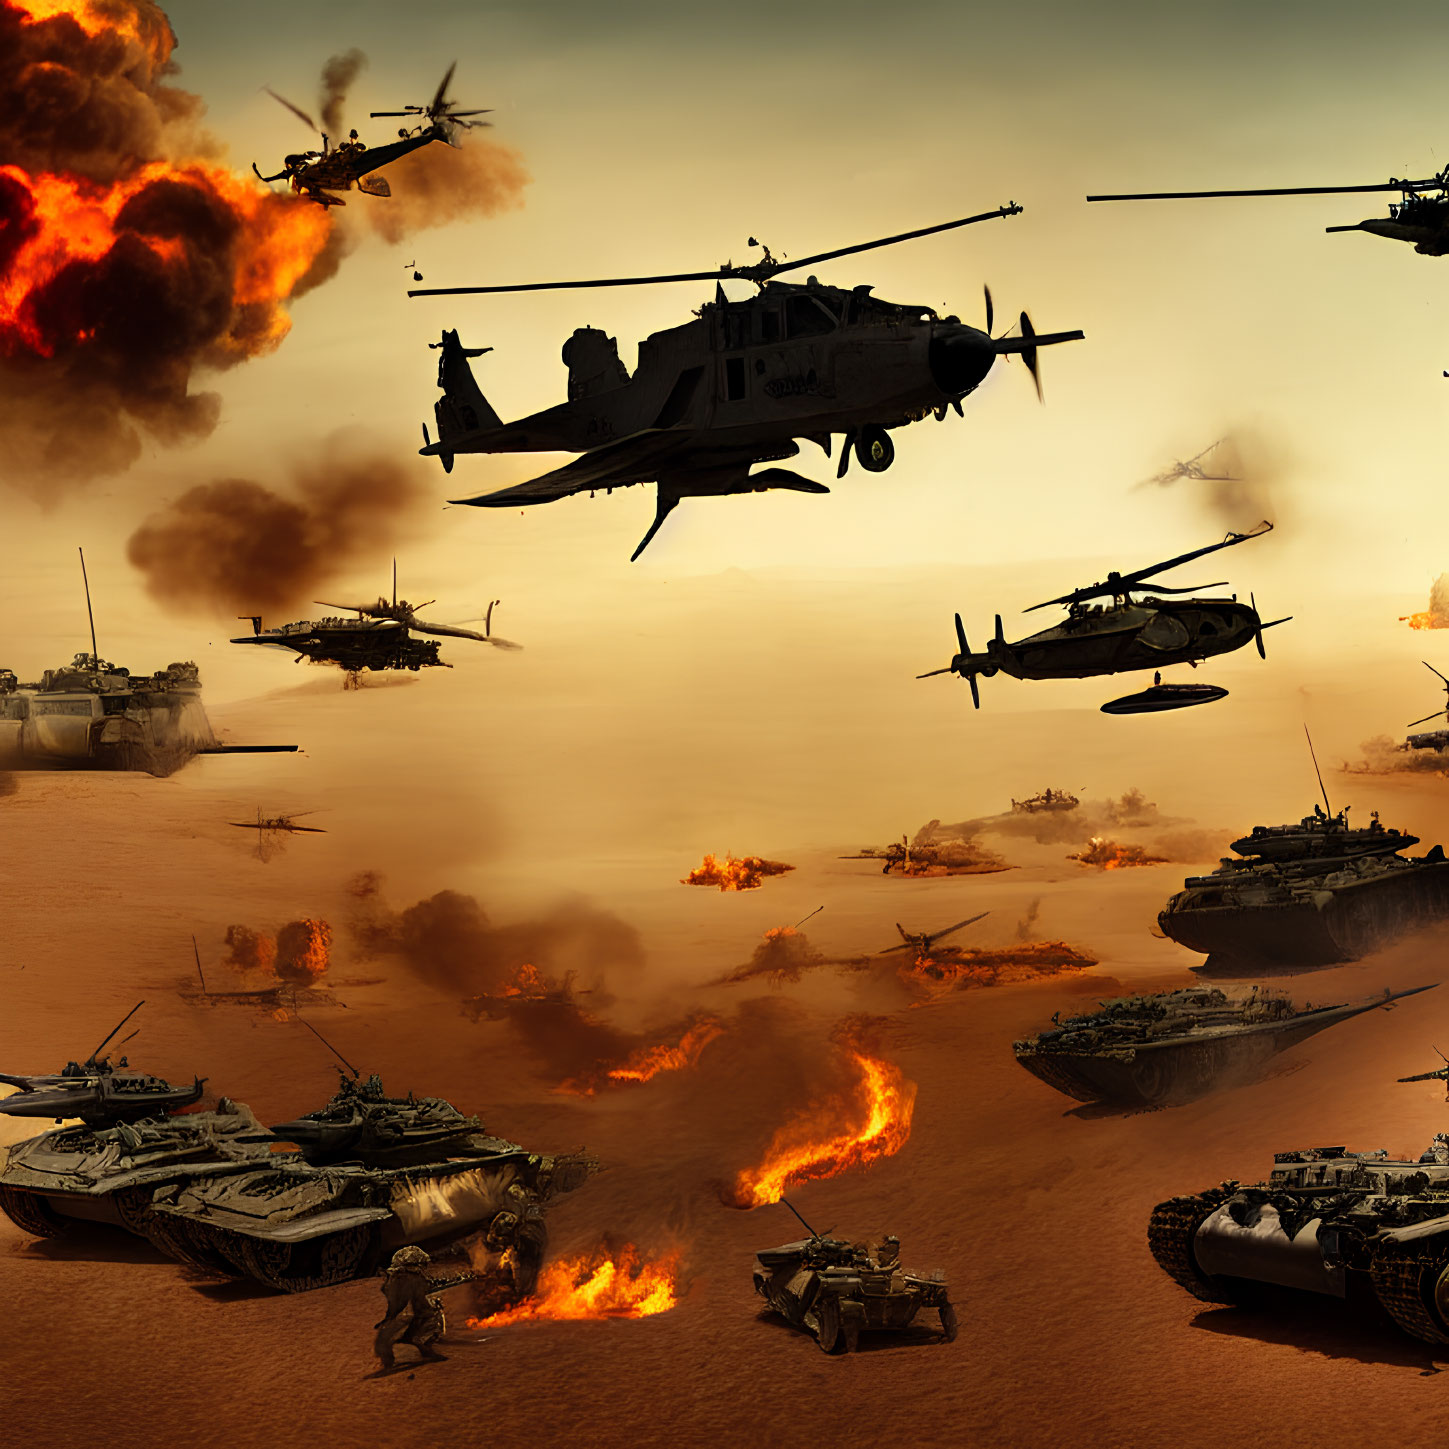 Intense desert battle with helicopters, tanks, and explosions